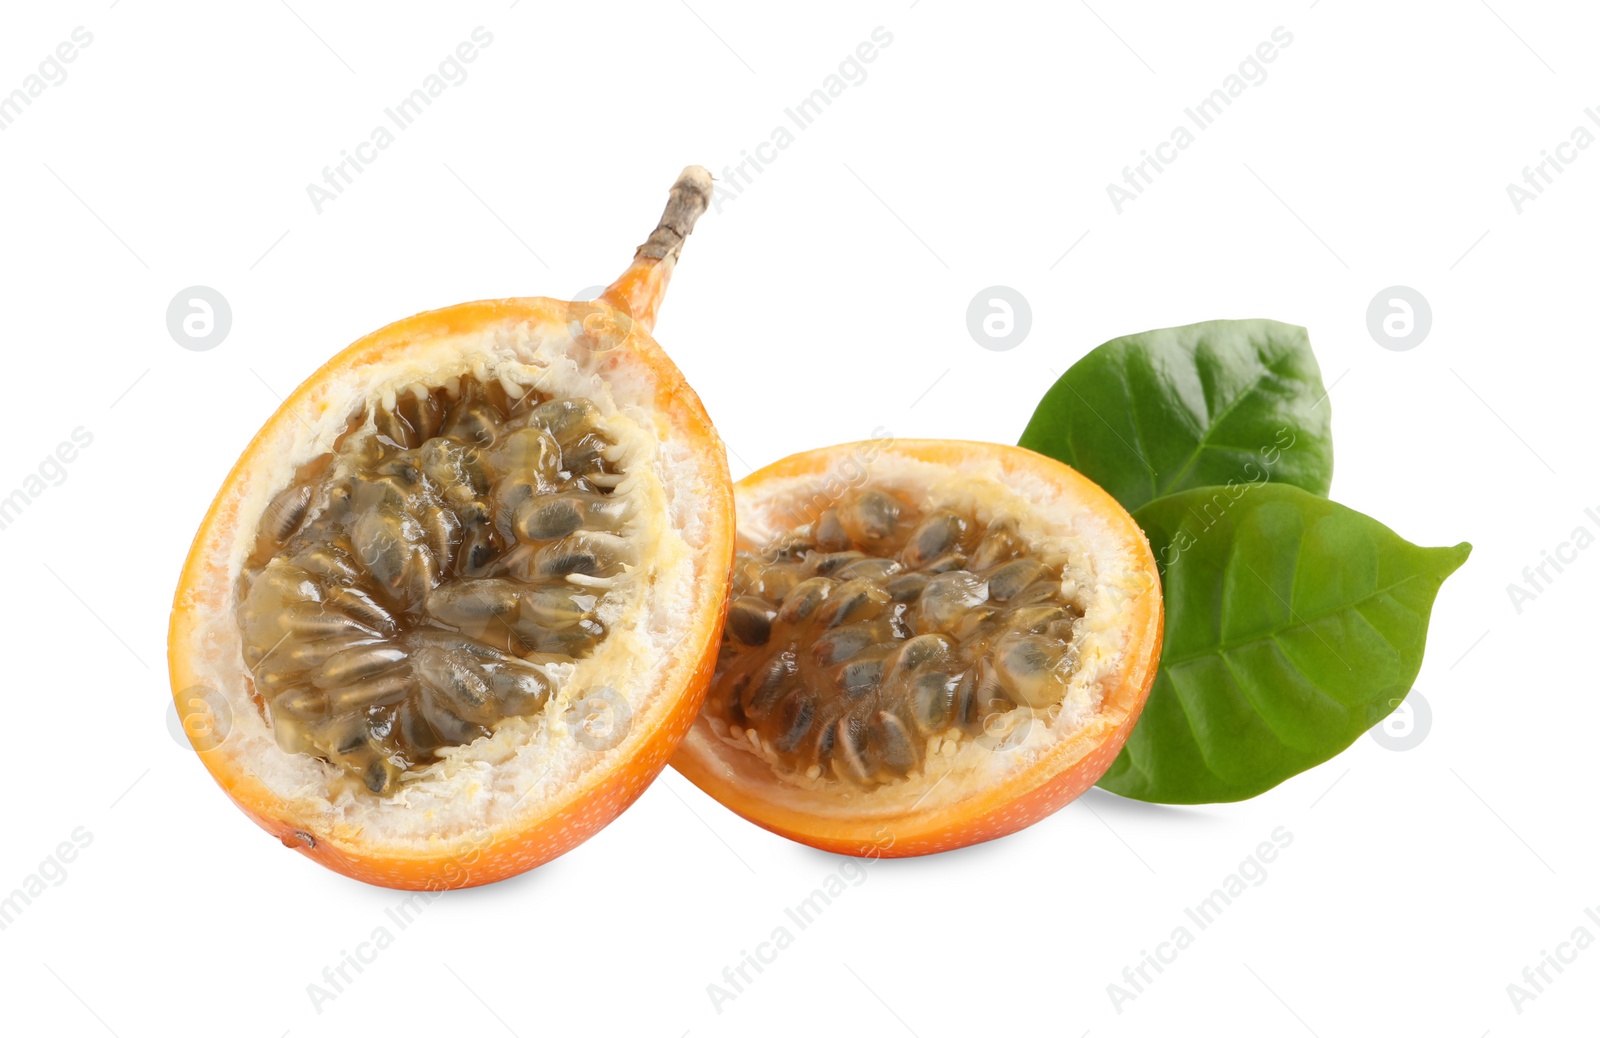 Photo of Halves of delicious ripe granadillas with green leaves isolated on white